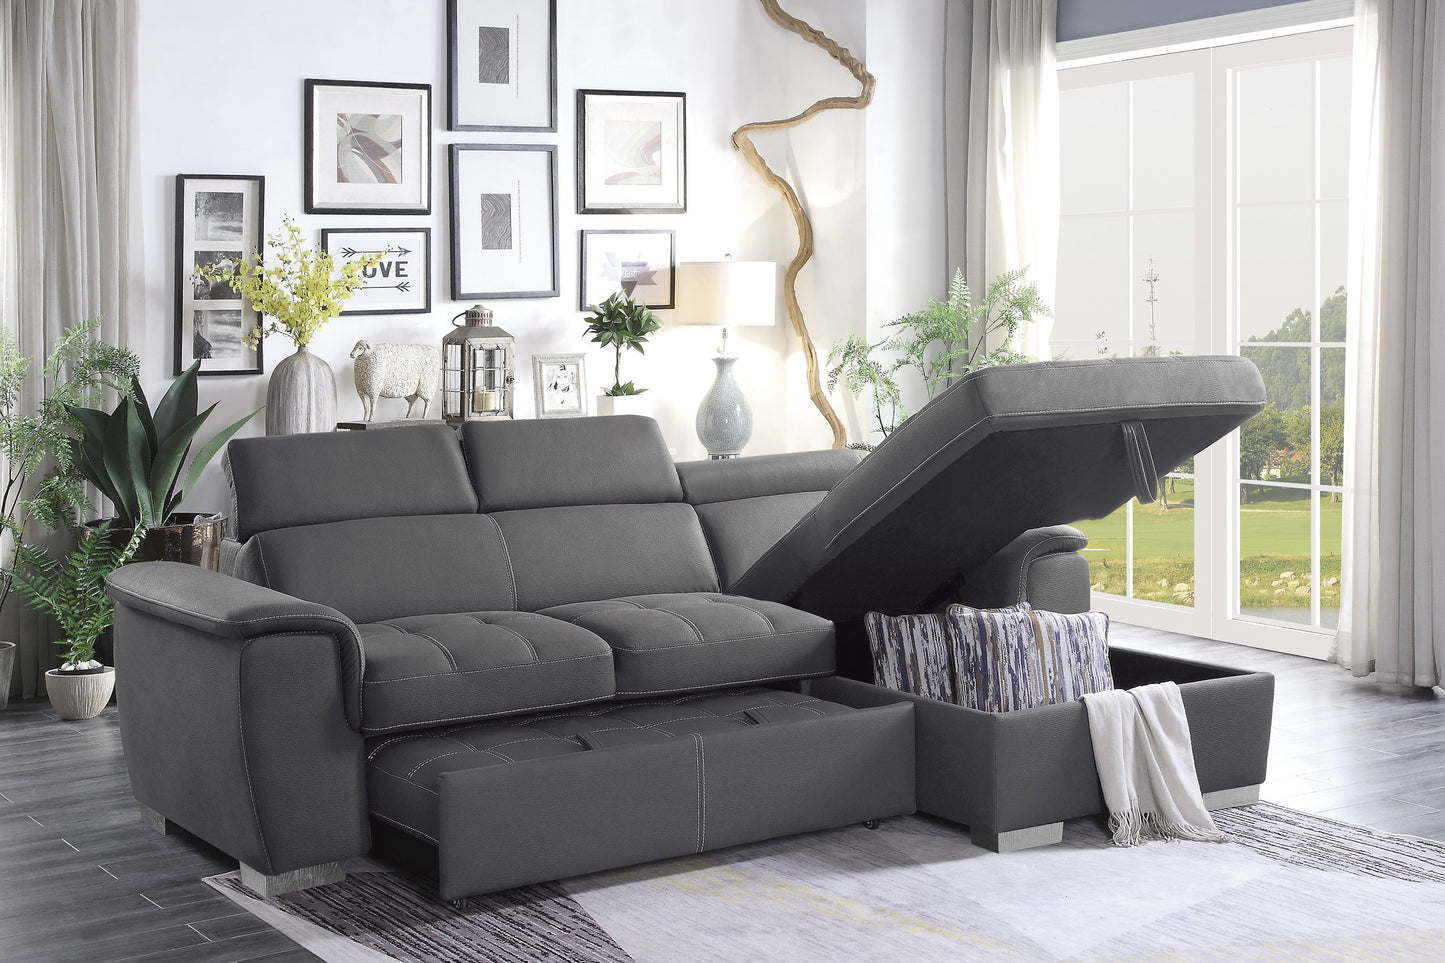 Ferriday 2-Piece Sectional with Pull-out Bed and Hidden Storage DARK GREY